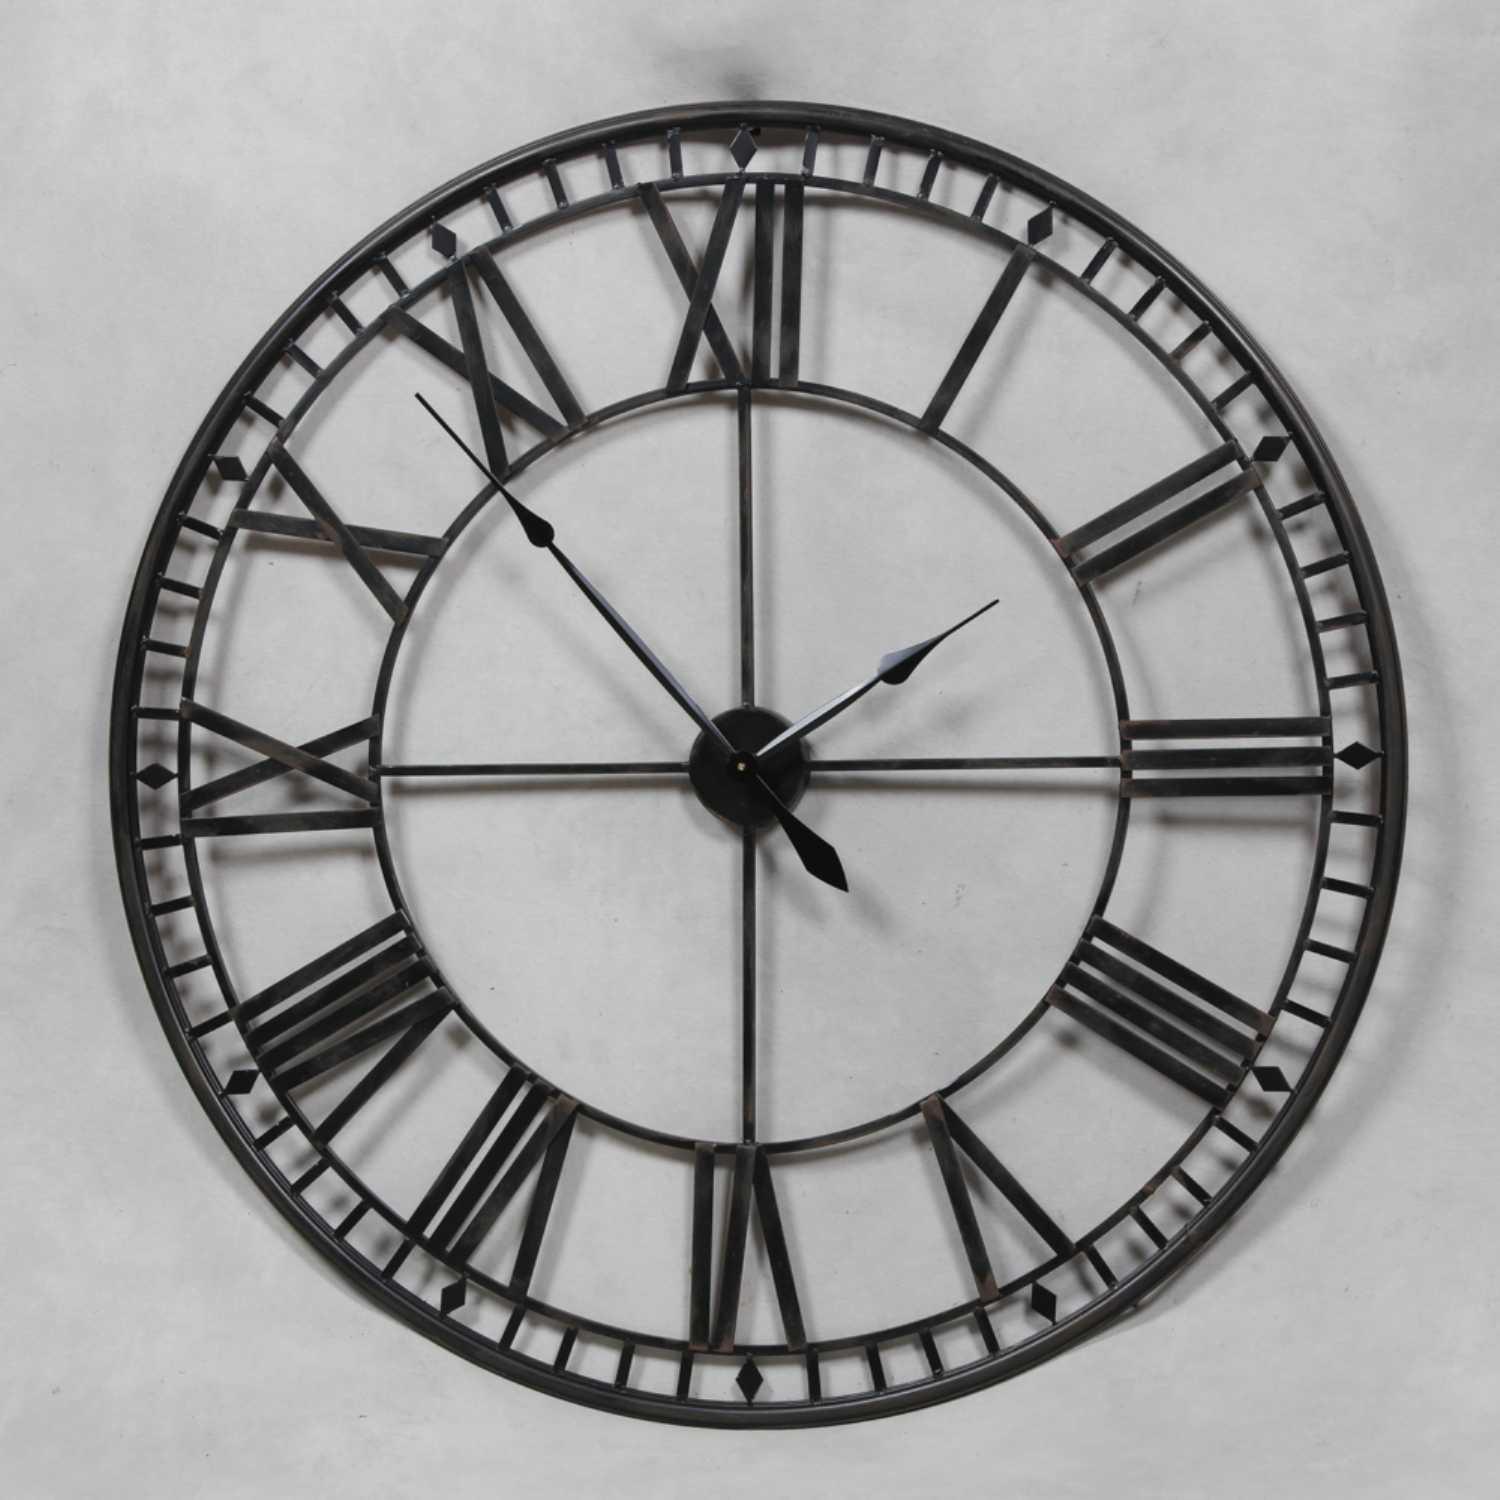 London Large Round Black Painted Skeleton Wall Clock Roman Numerals